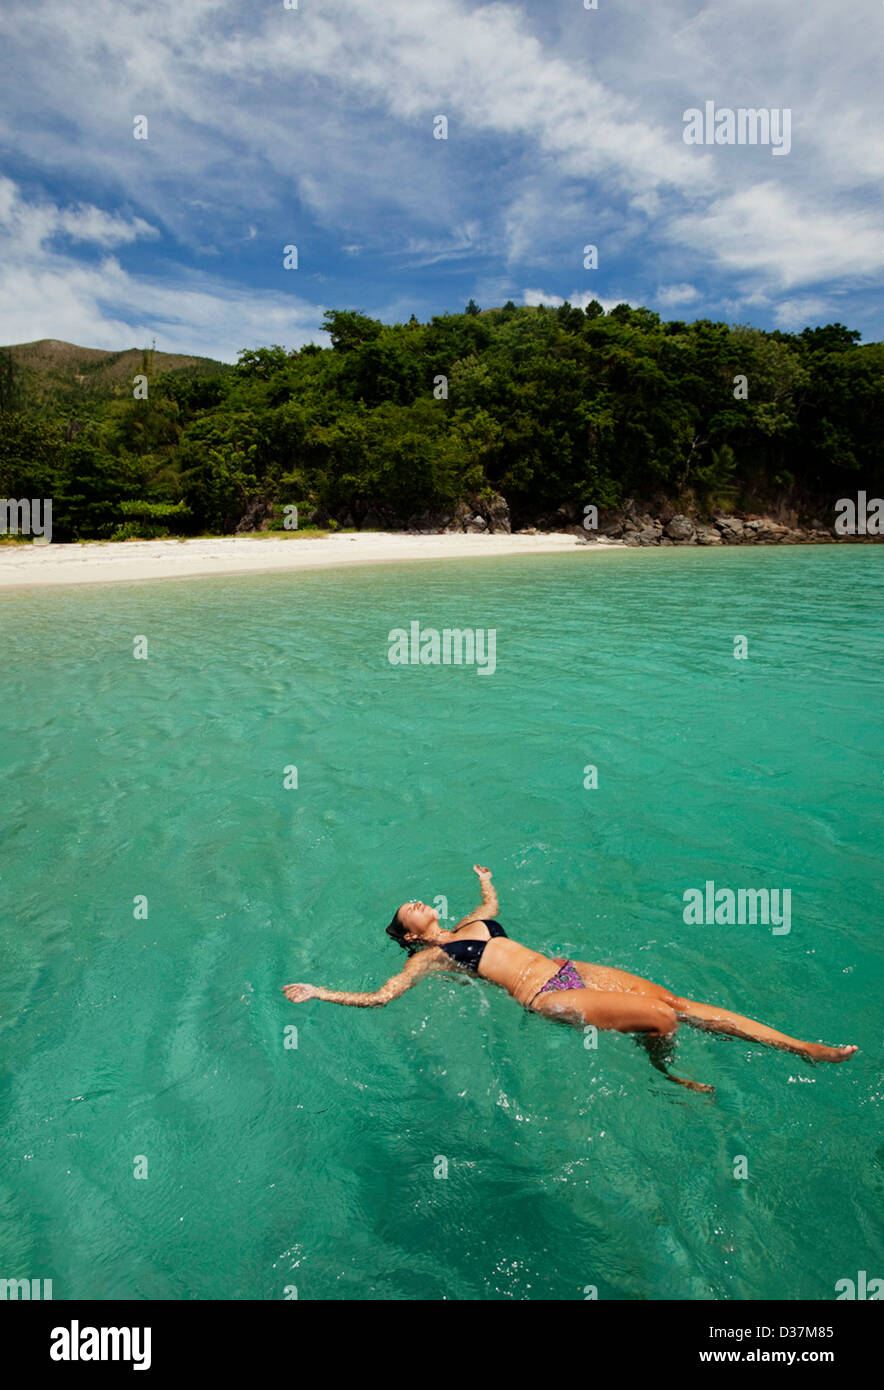 Woman floating in tropical eau Banque D'Images